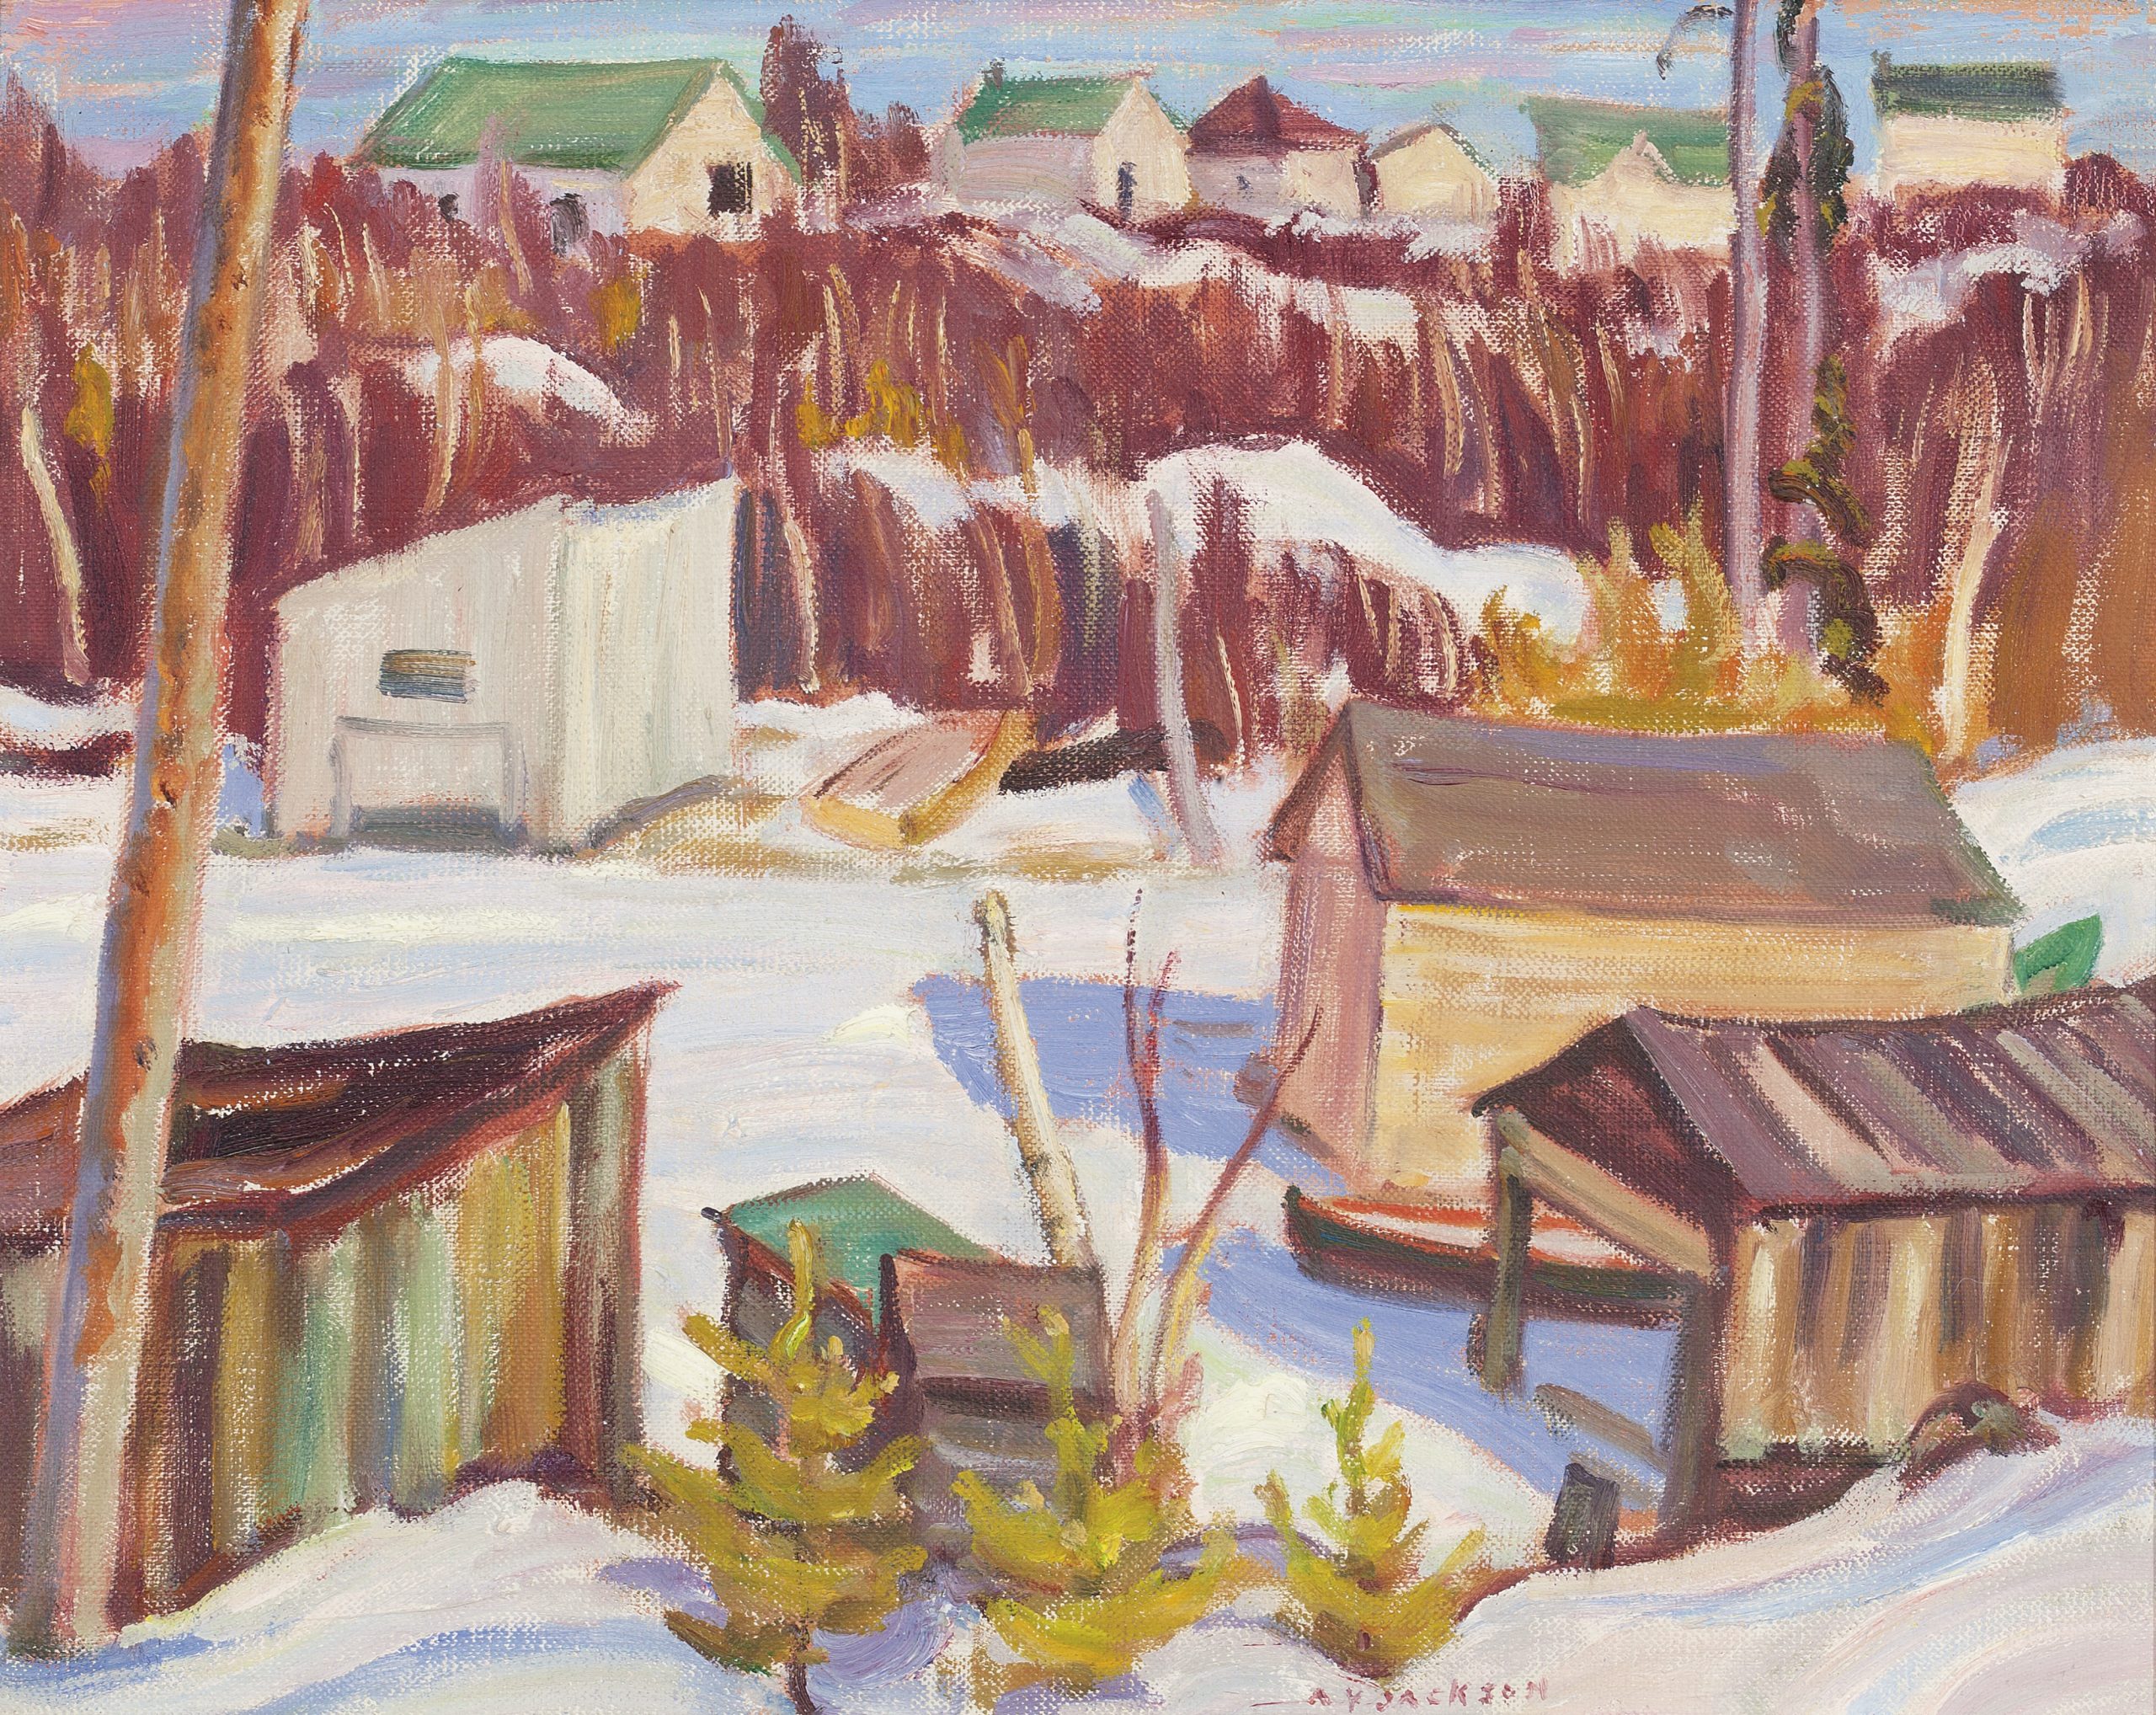 148 Alexander Young Jackson 1882 - 1974 MINER'S COTTAGES, COCHENOUR-WILLANS MINES, RED LAKE COUNTRY